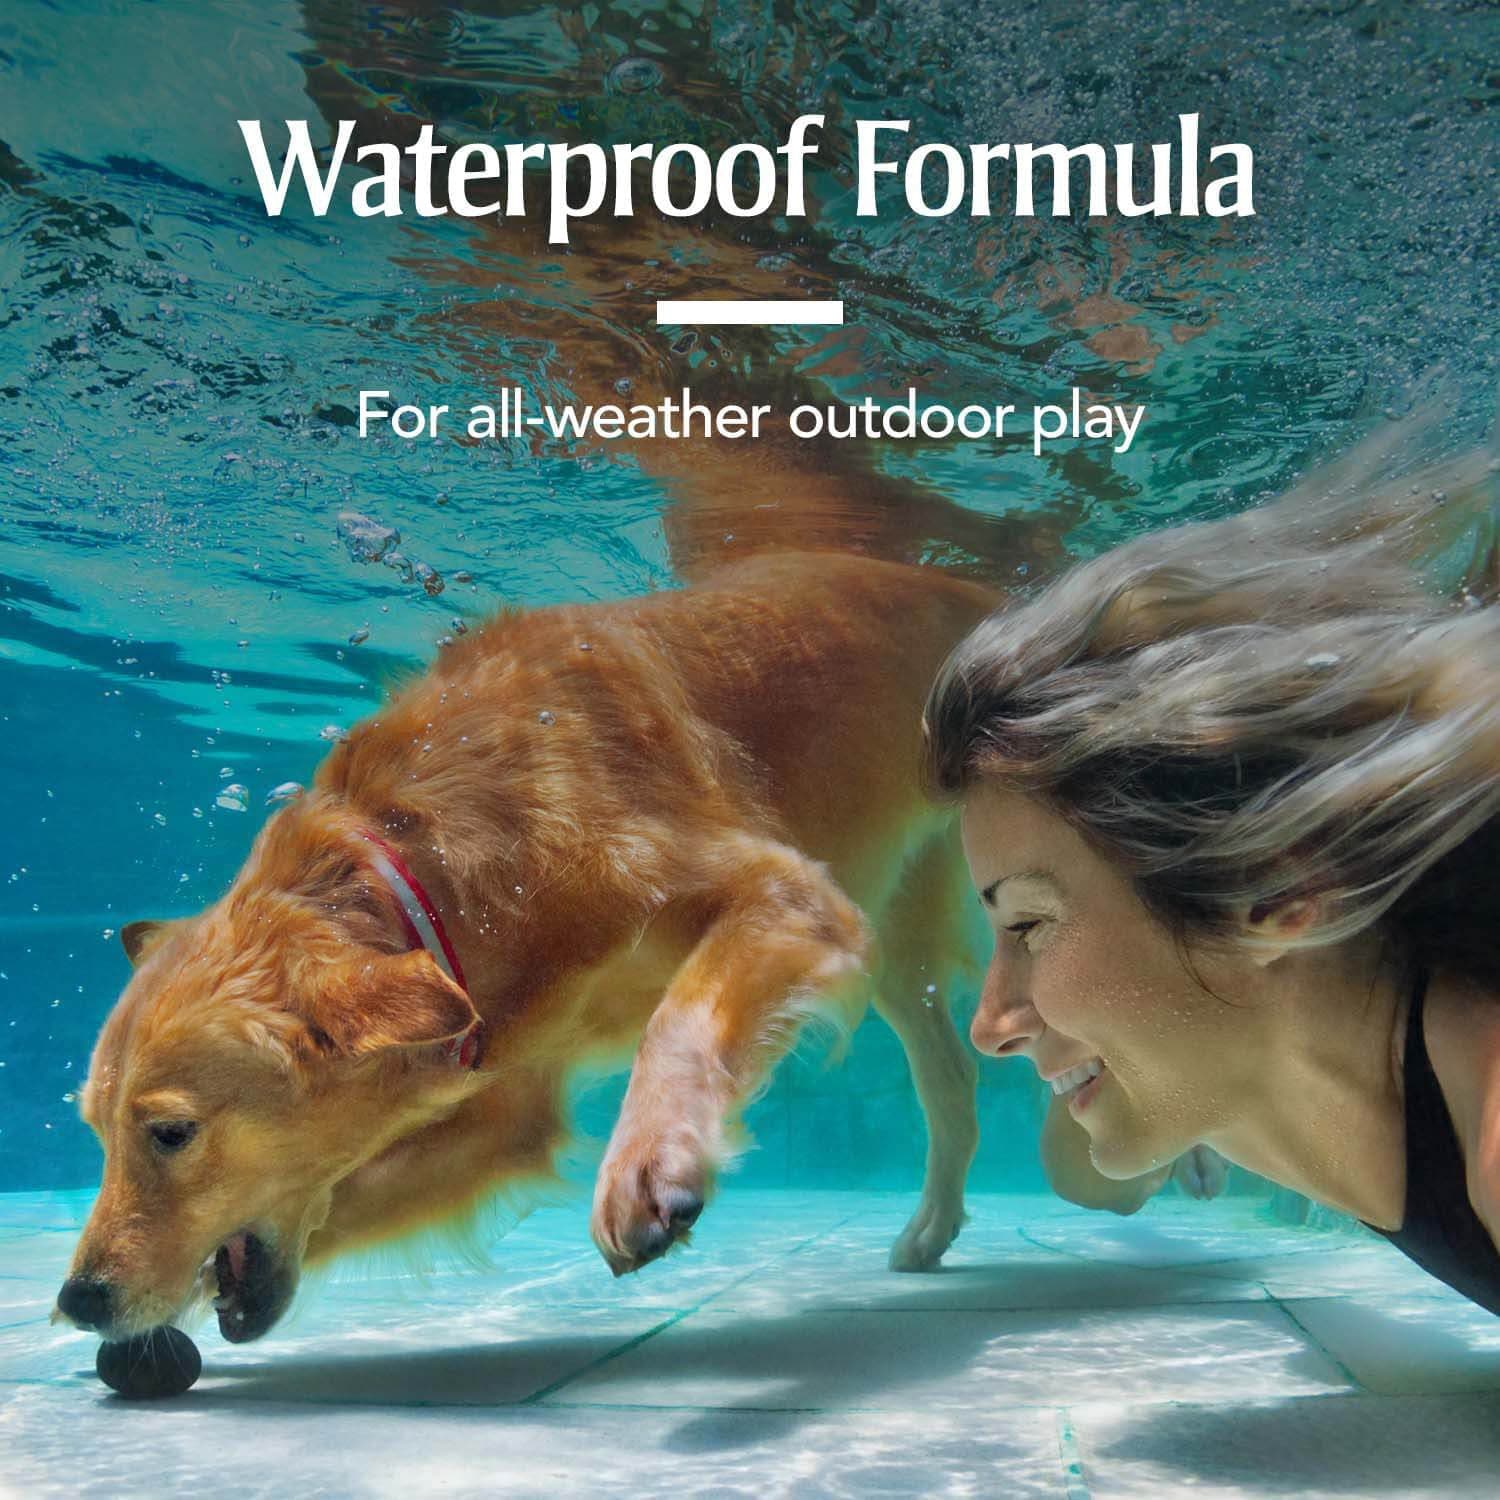 waterproof formula with current product